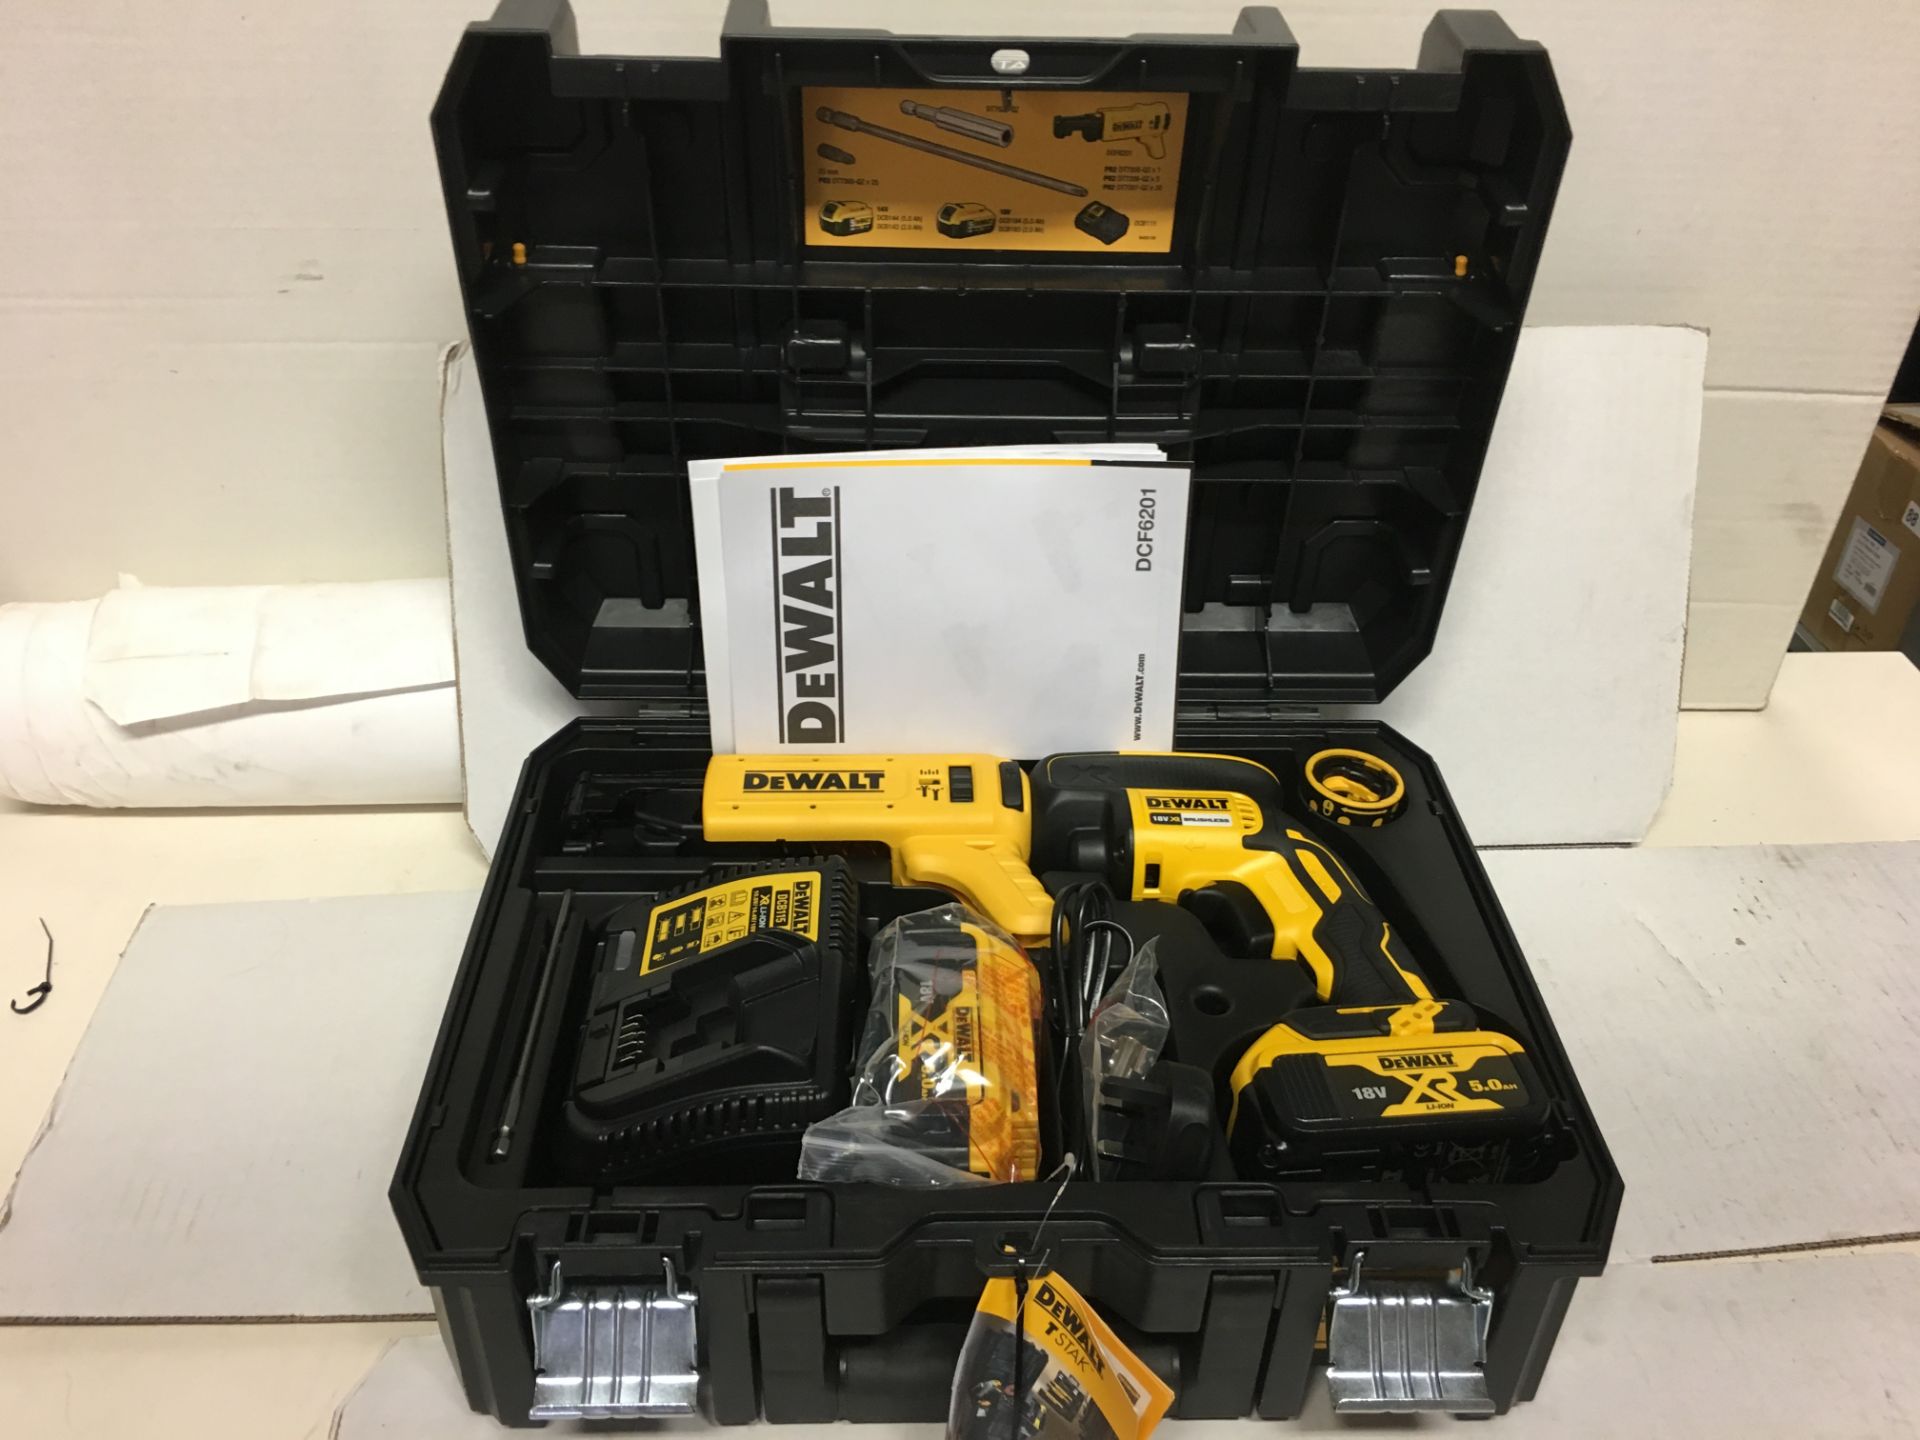 1 x Dewalt DCF620P2K-GB Collated Drywall Screwdriver 18V Cordless Brushless (2 x 5.0Ah Batteries), 1 - Image 3 of 3